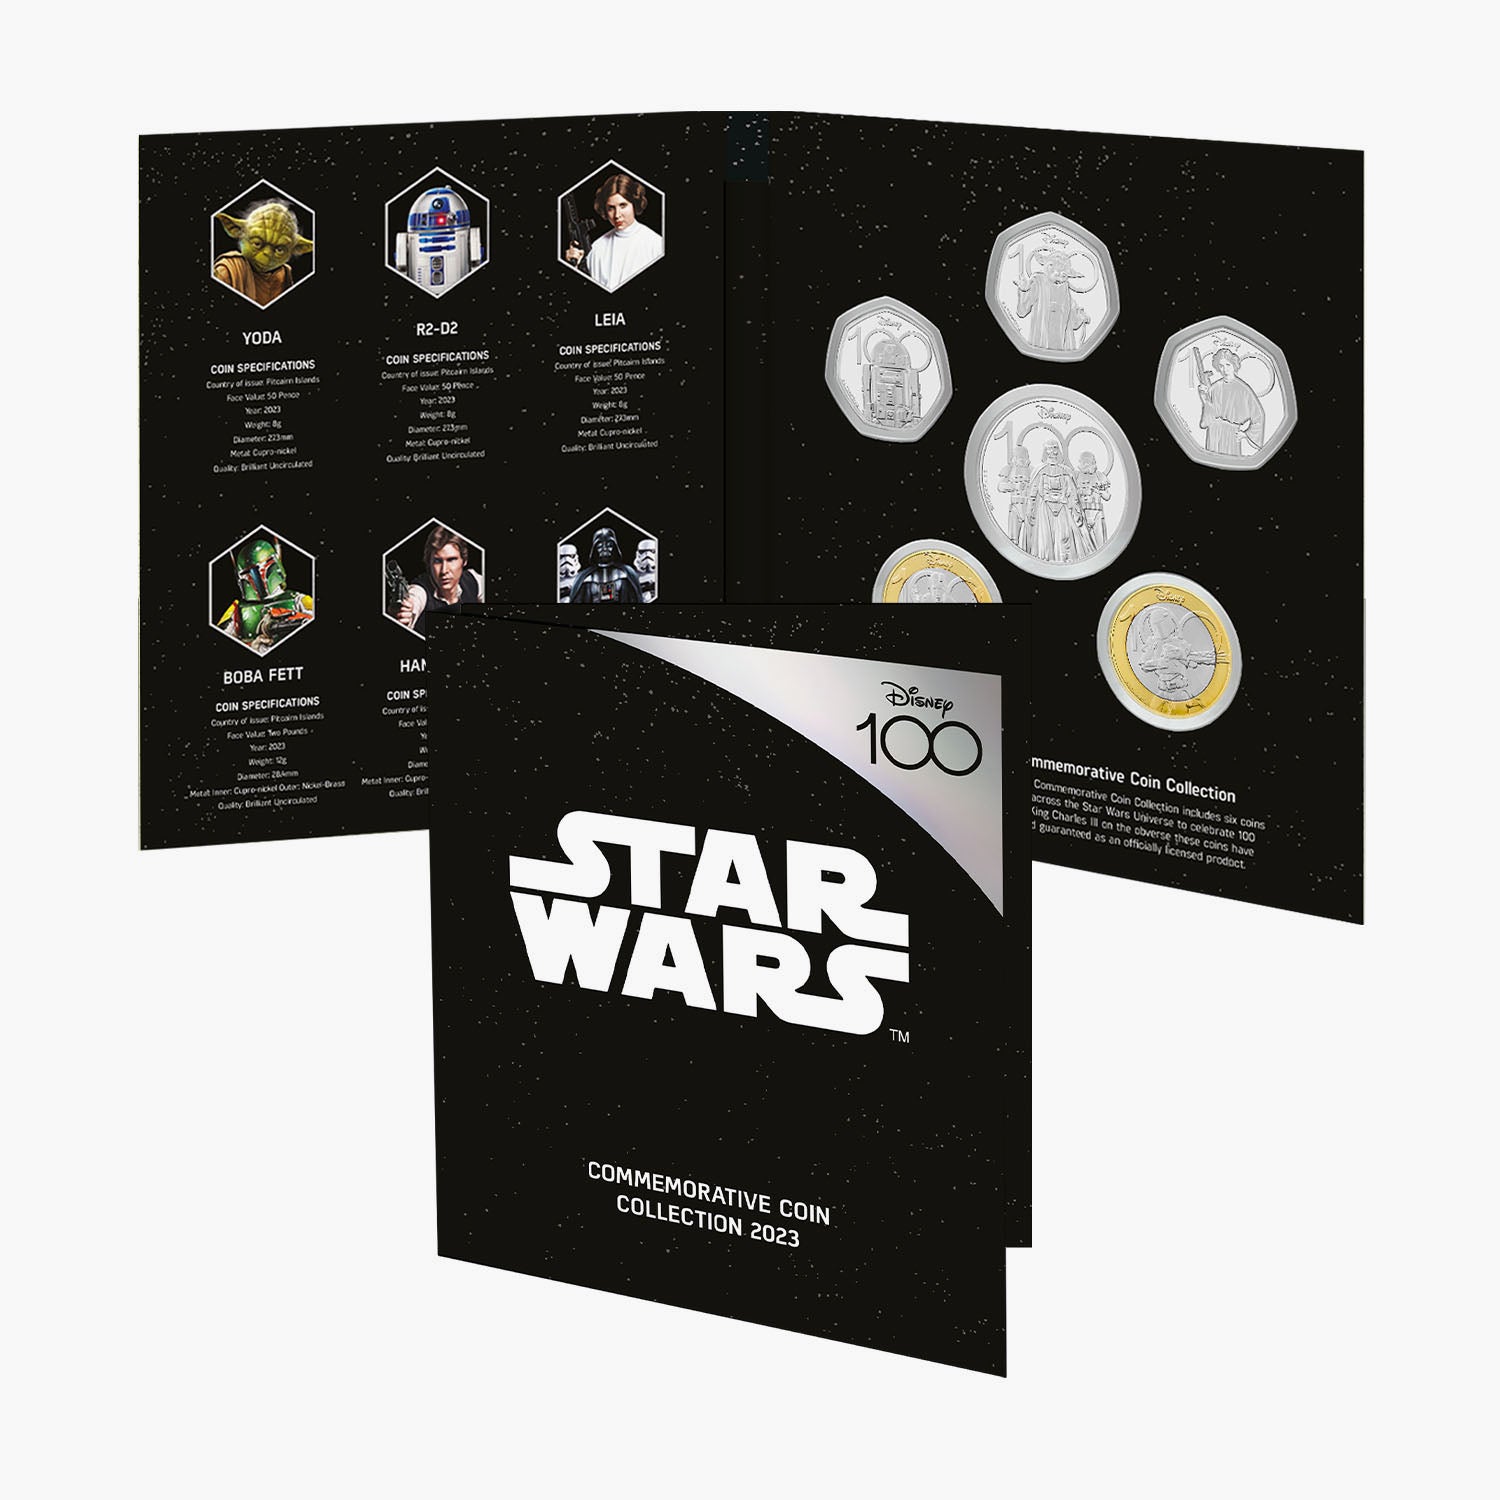 The Official Star Wars 2023 Coin Set